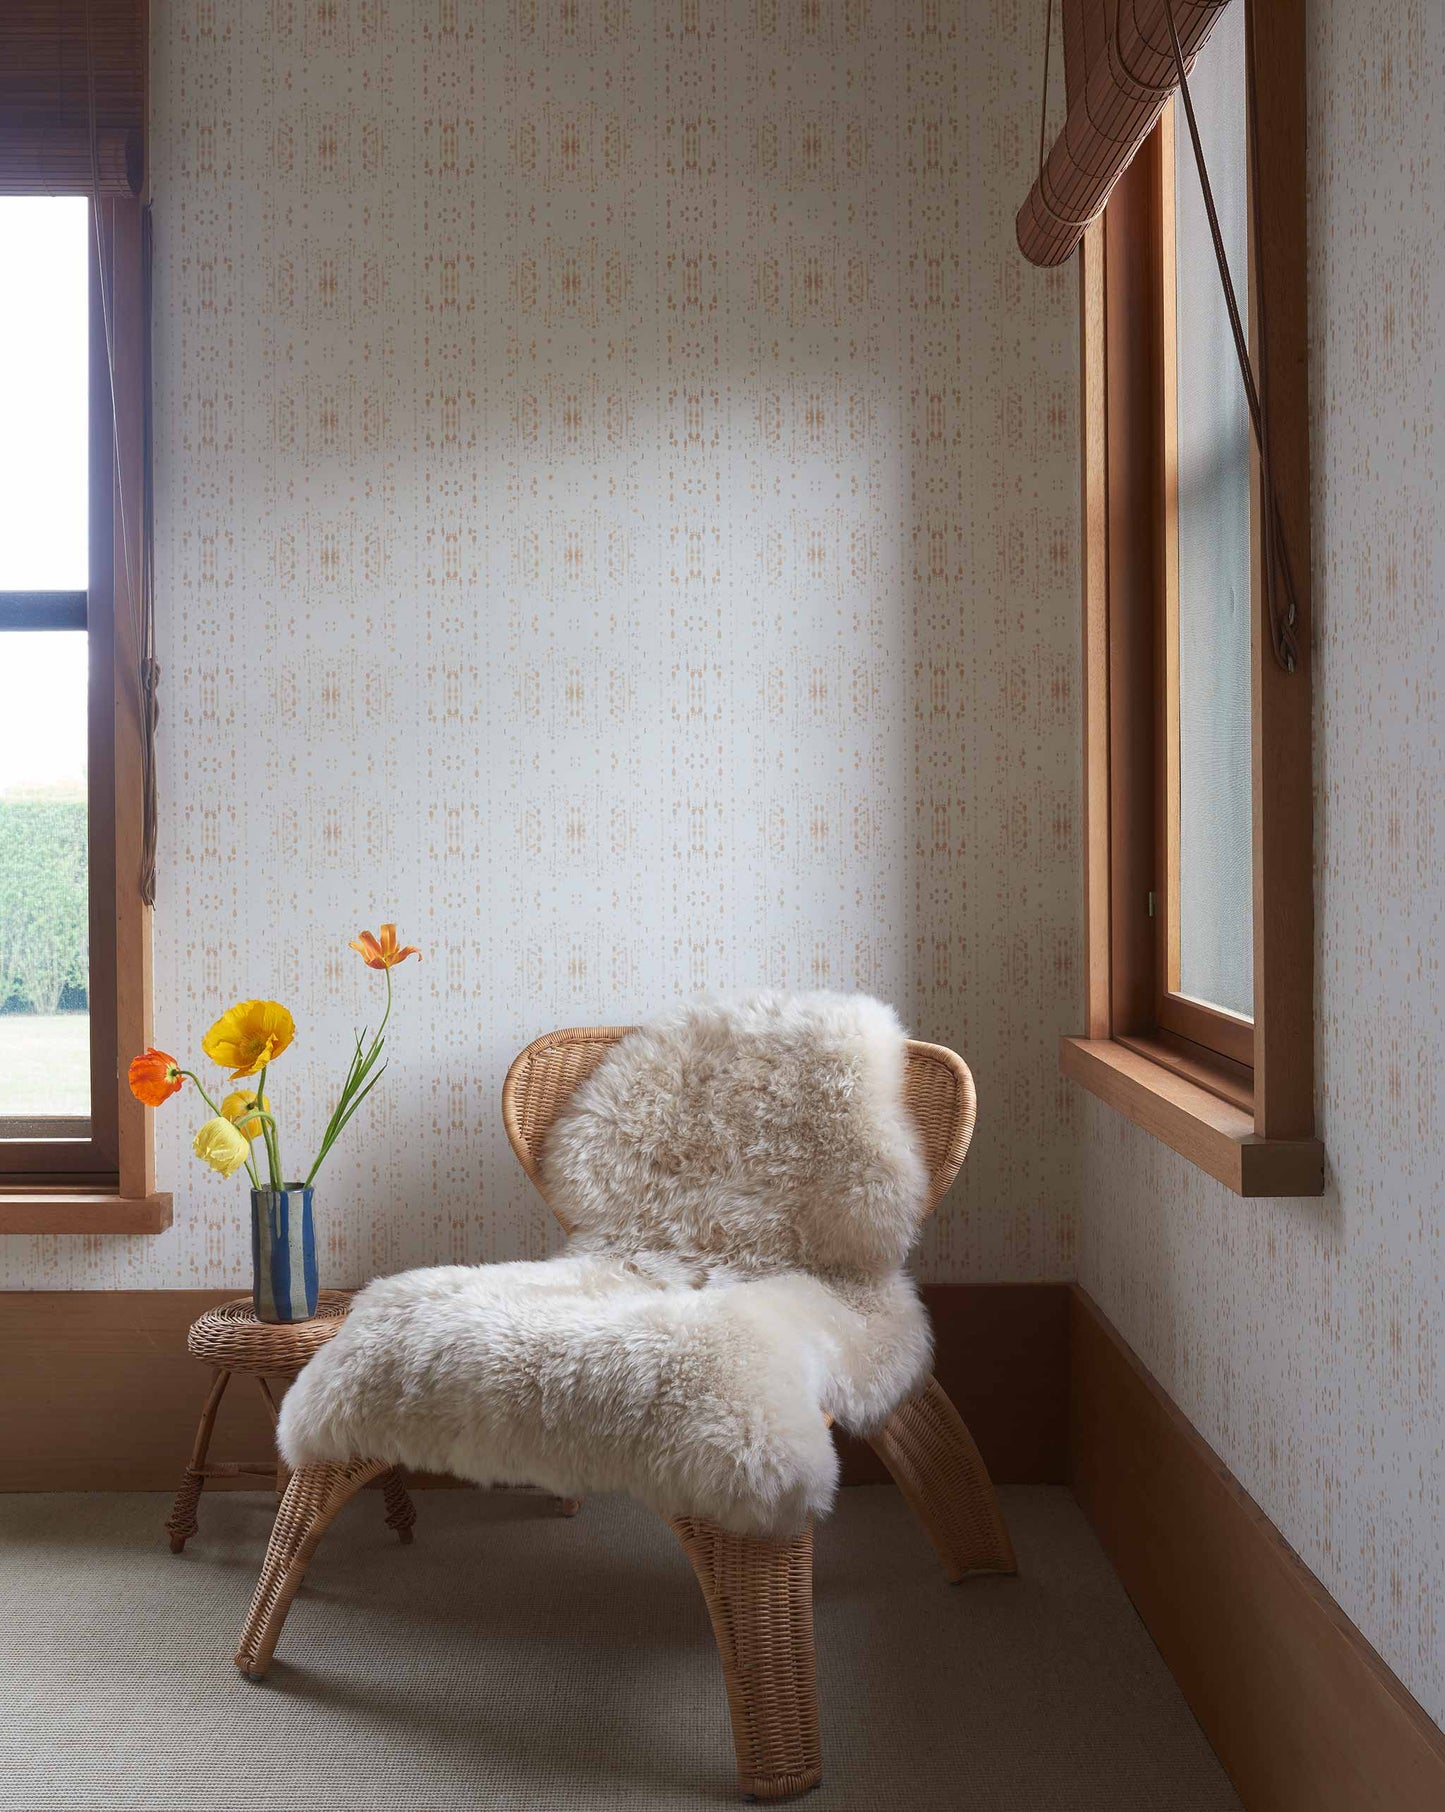 Eskayel's Omaha Kinship Wallpaper in the colorway Flax installed in a room with warm wooden furniture accents.